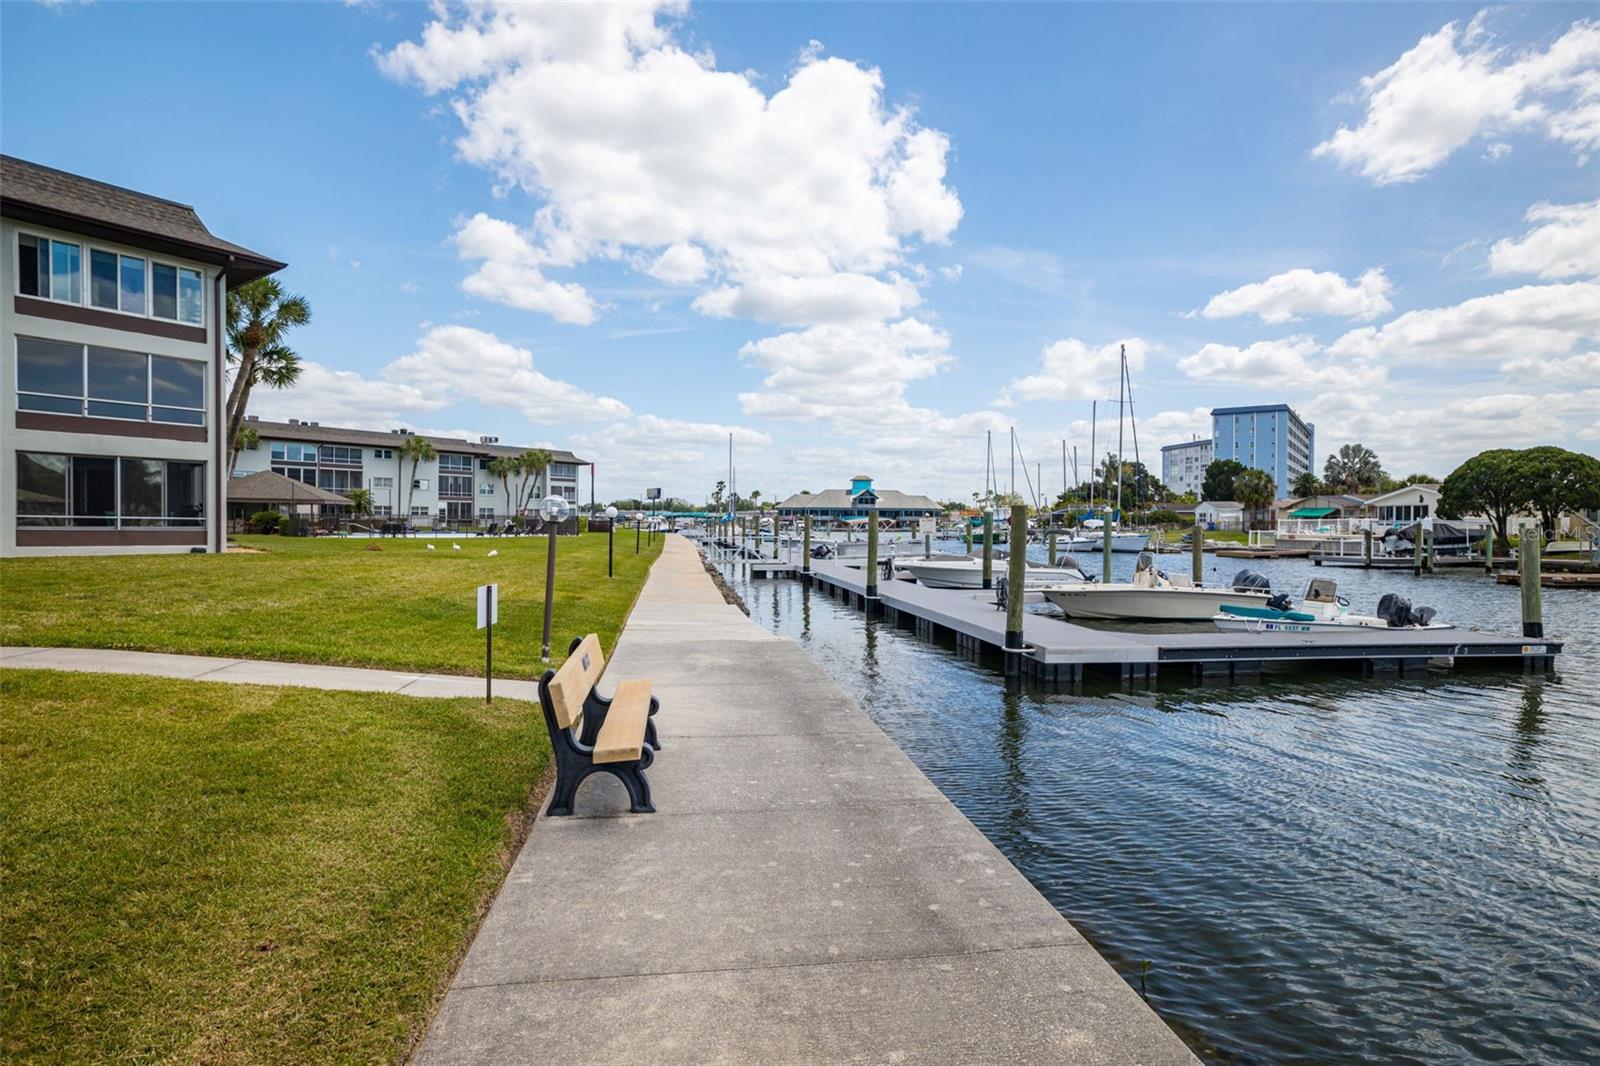 Seawall /side walk enroute to your private deeded boat slip.